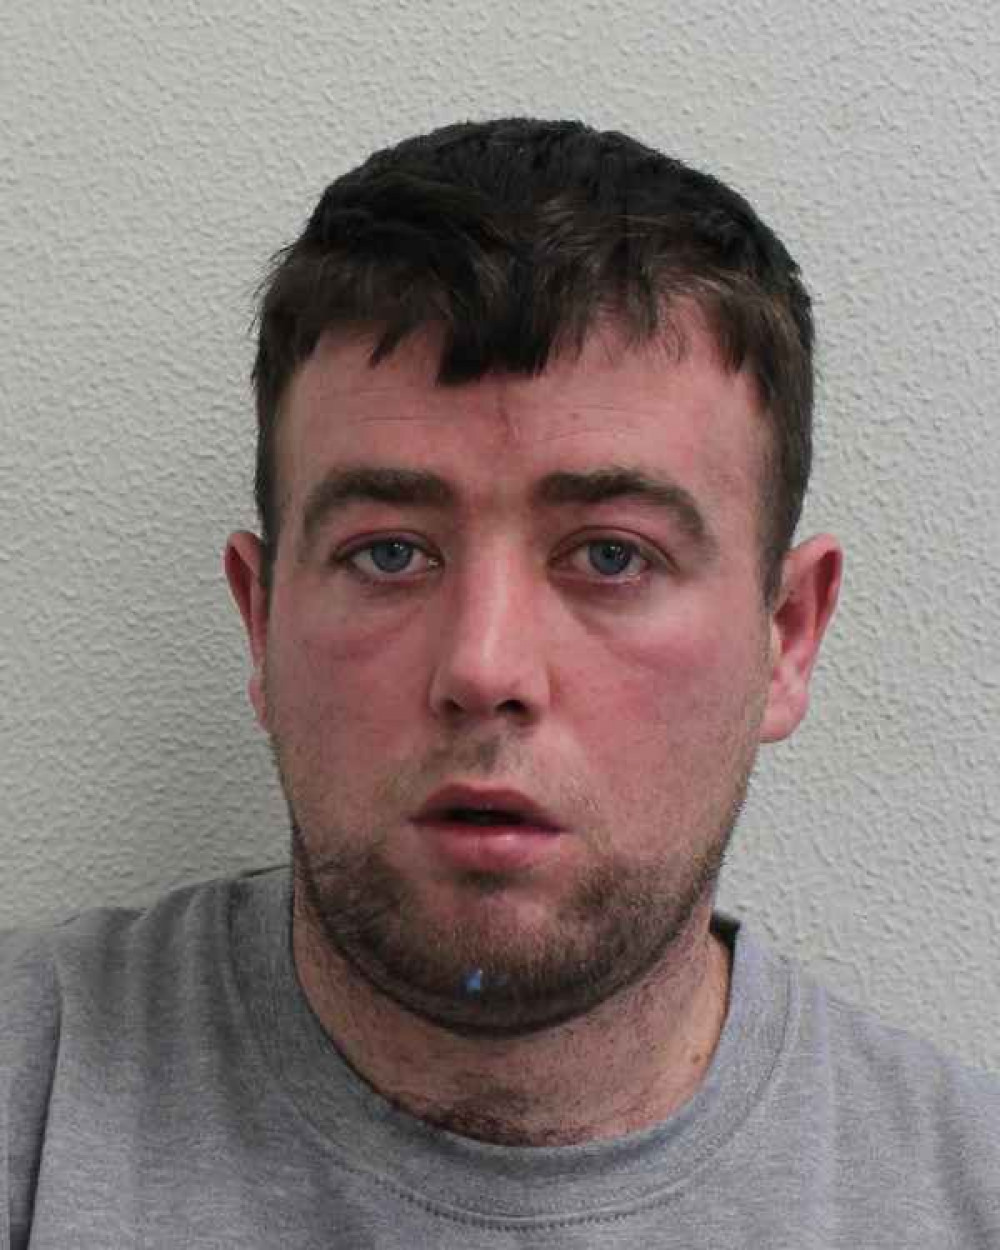 Thomas McCarthy was sentenced last week after assaulting the officer. Image Credit: Ealing Police